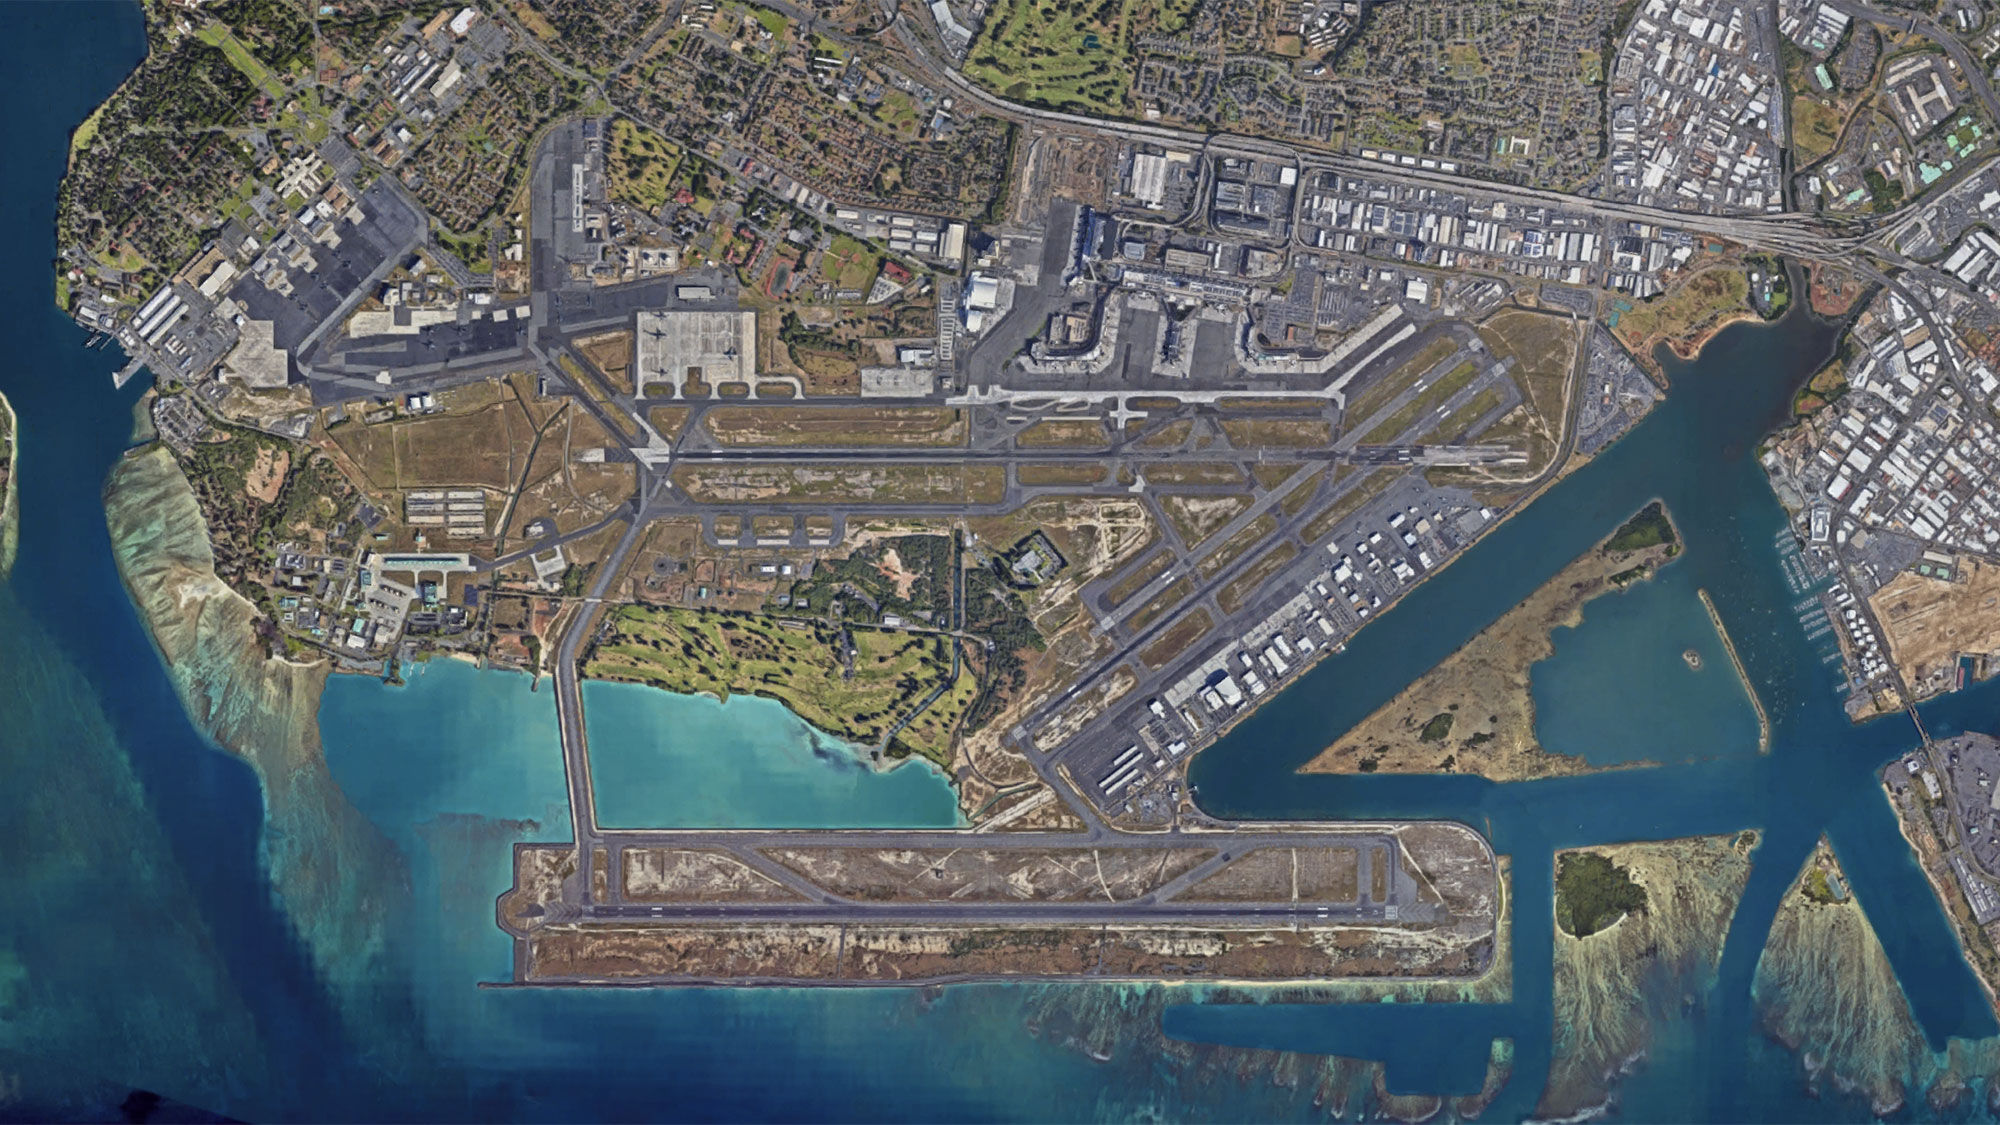 Honolulu Airport’s runway 8L has been closed for widening and resurfacing since October, hurting Hawaiian Airlines' on-time performance.